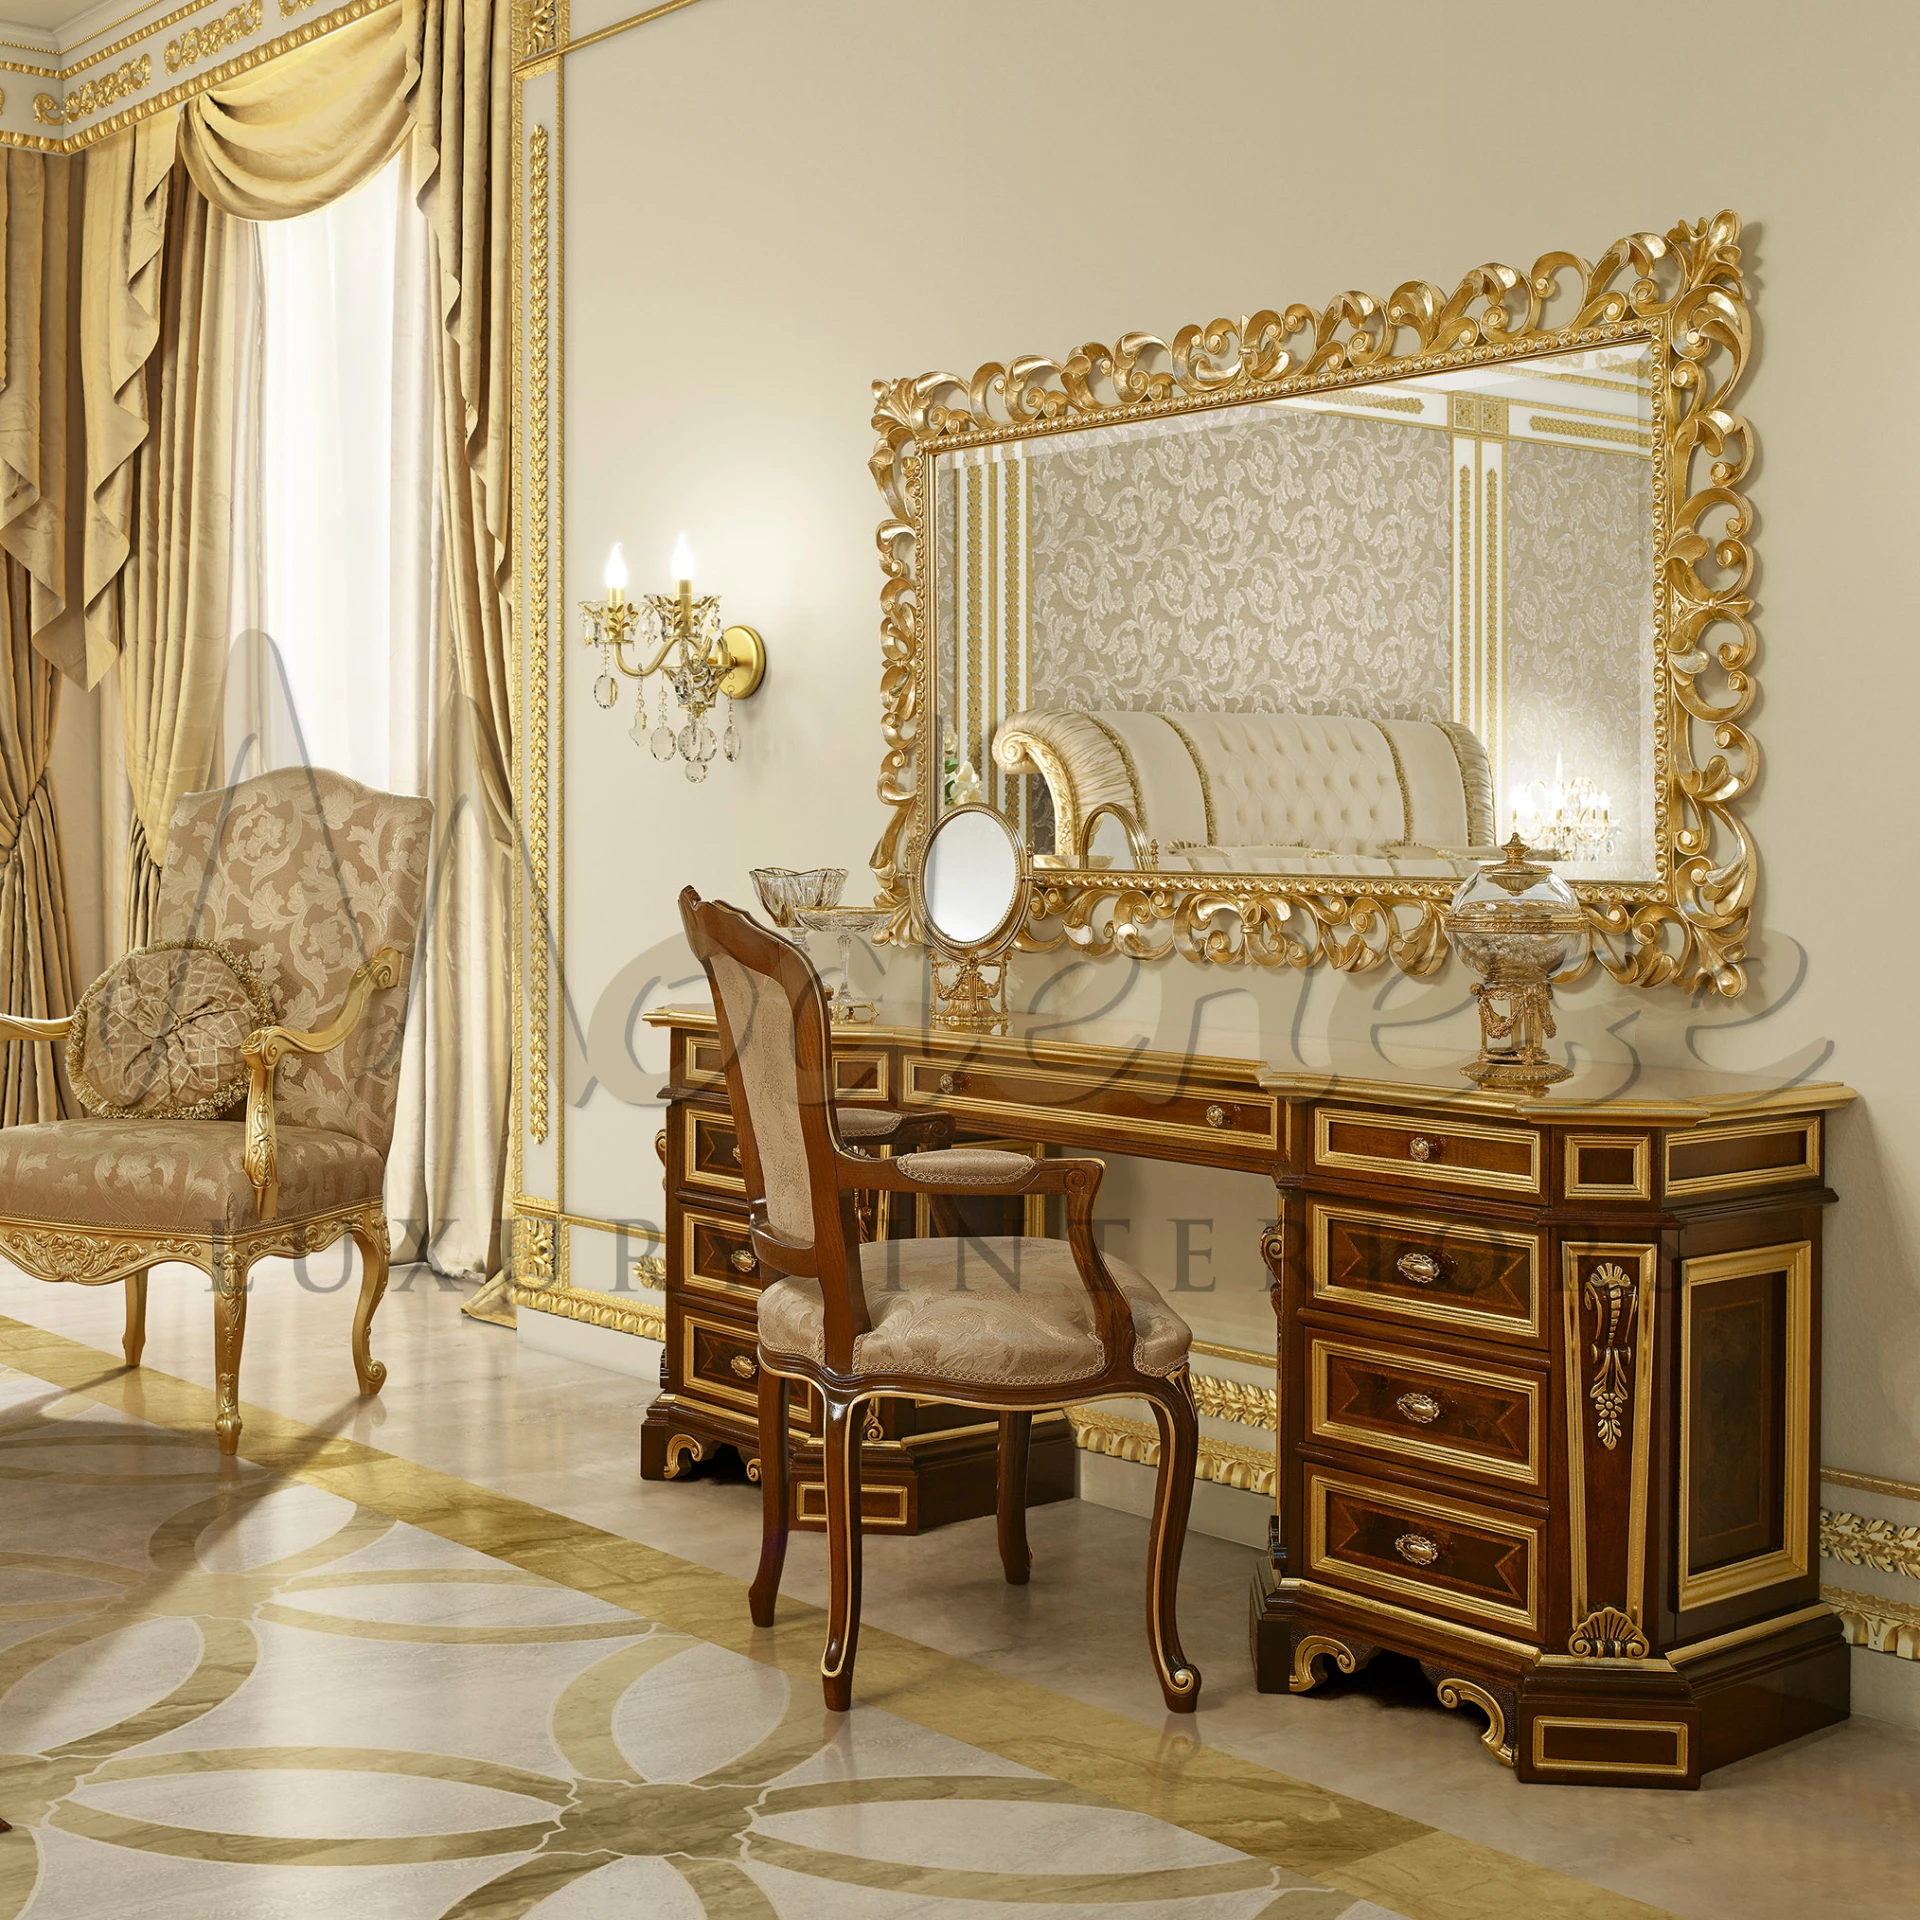 Detail of an elaborate dressing table with rich wood tones, golden accents, and a grand mirror by Modenese Furniture